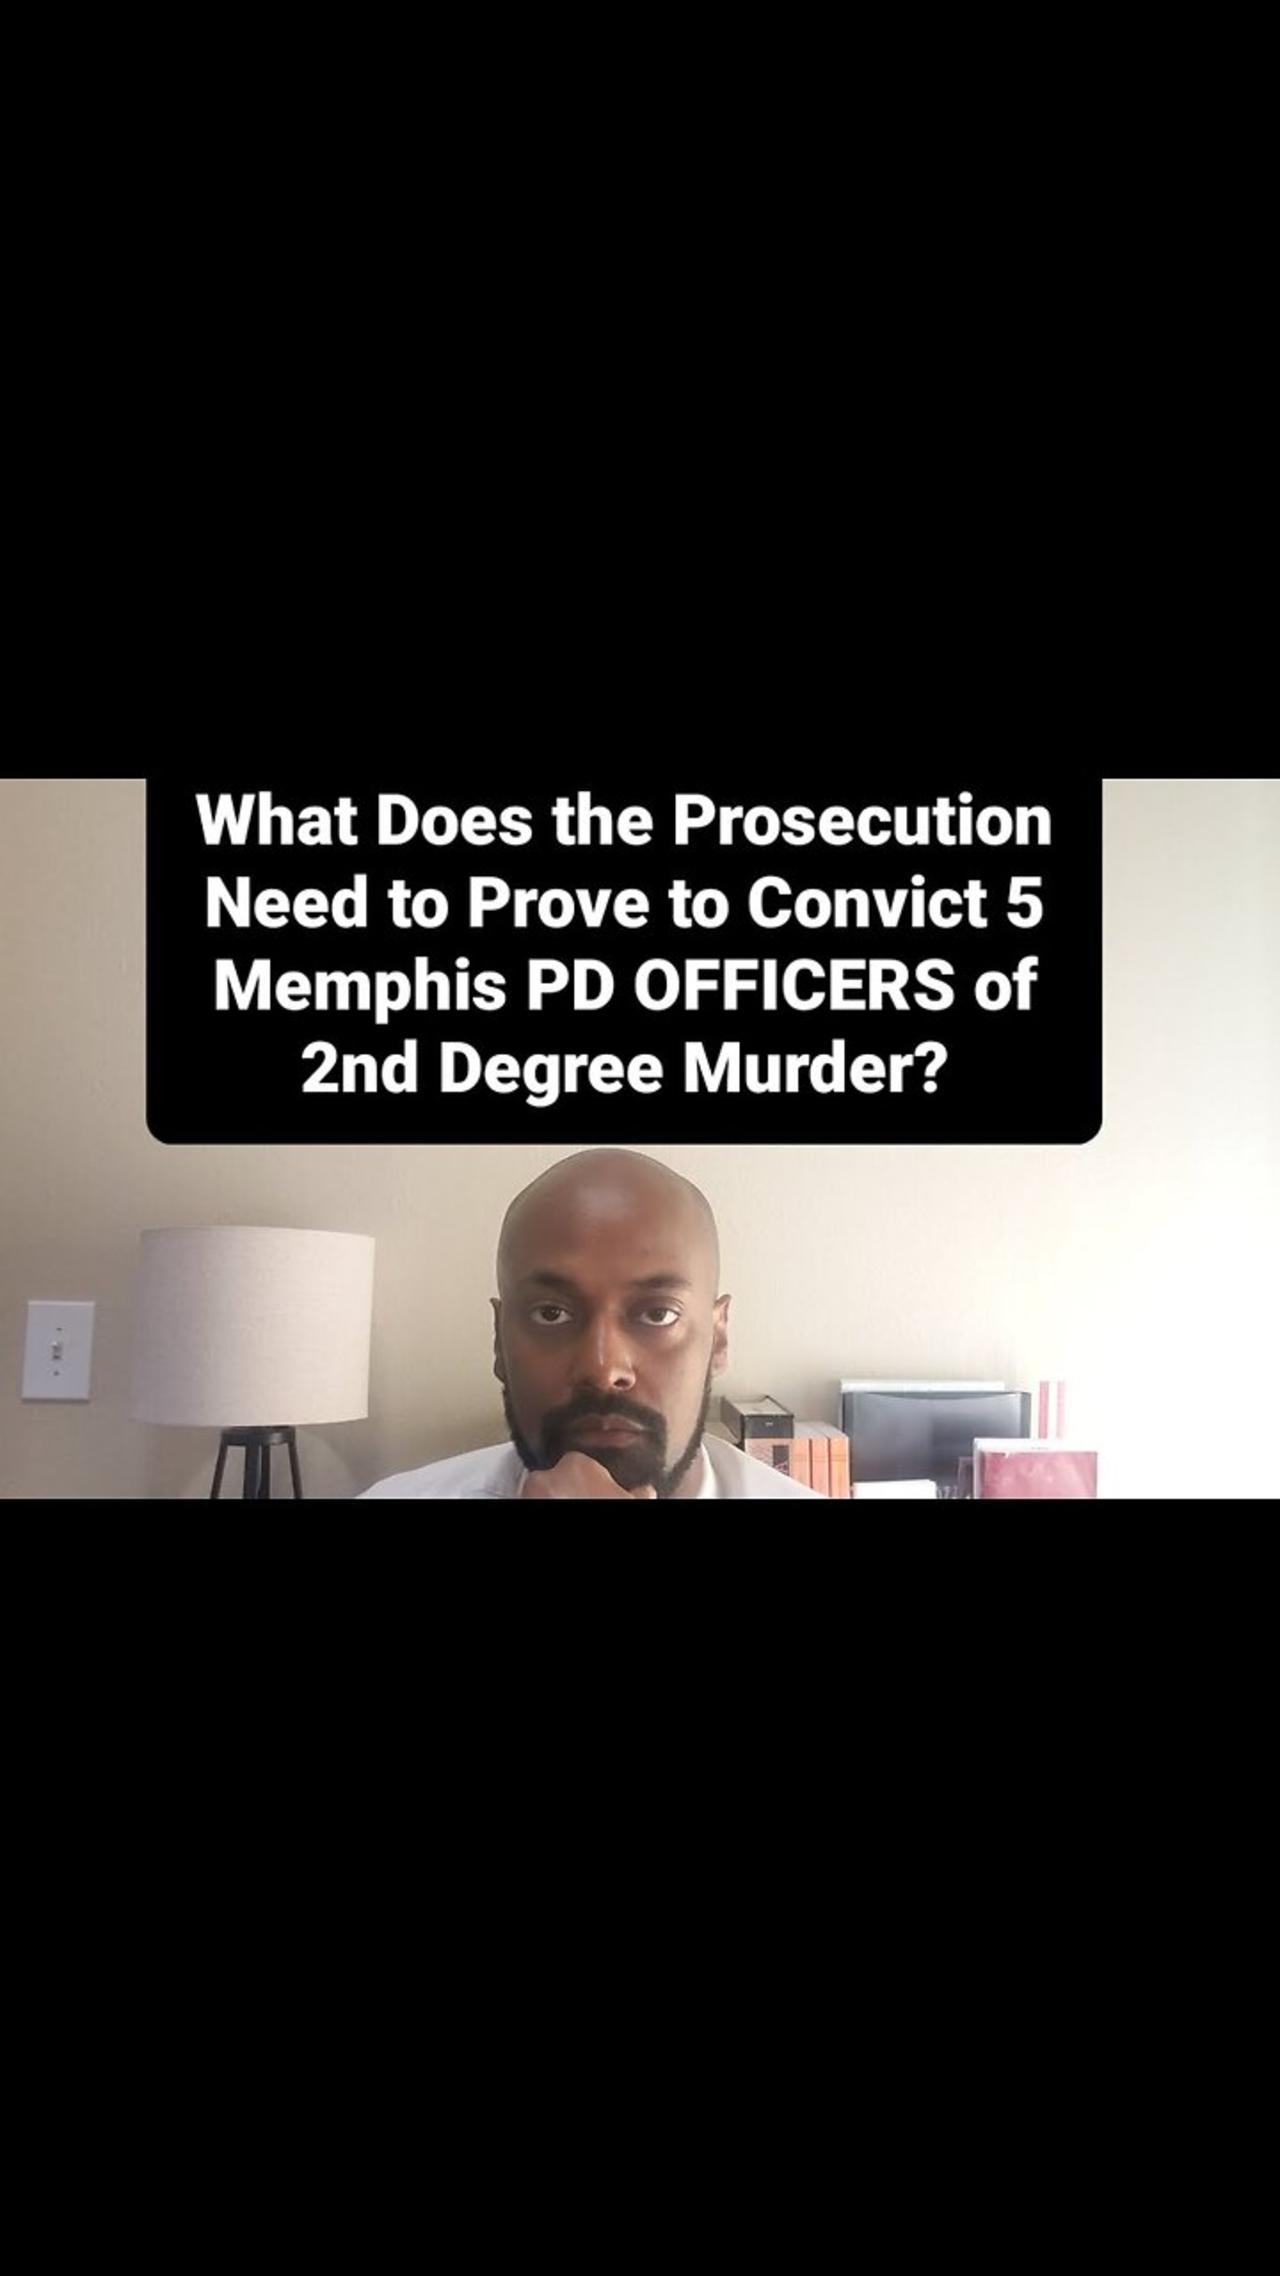 The Memphis District Attorney Must Prove This to Convict all 5 Memphis PD Officers!